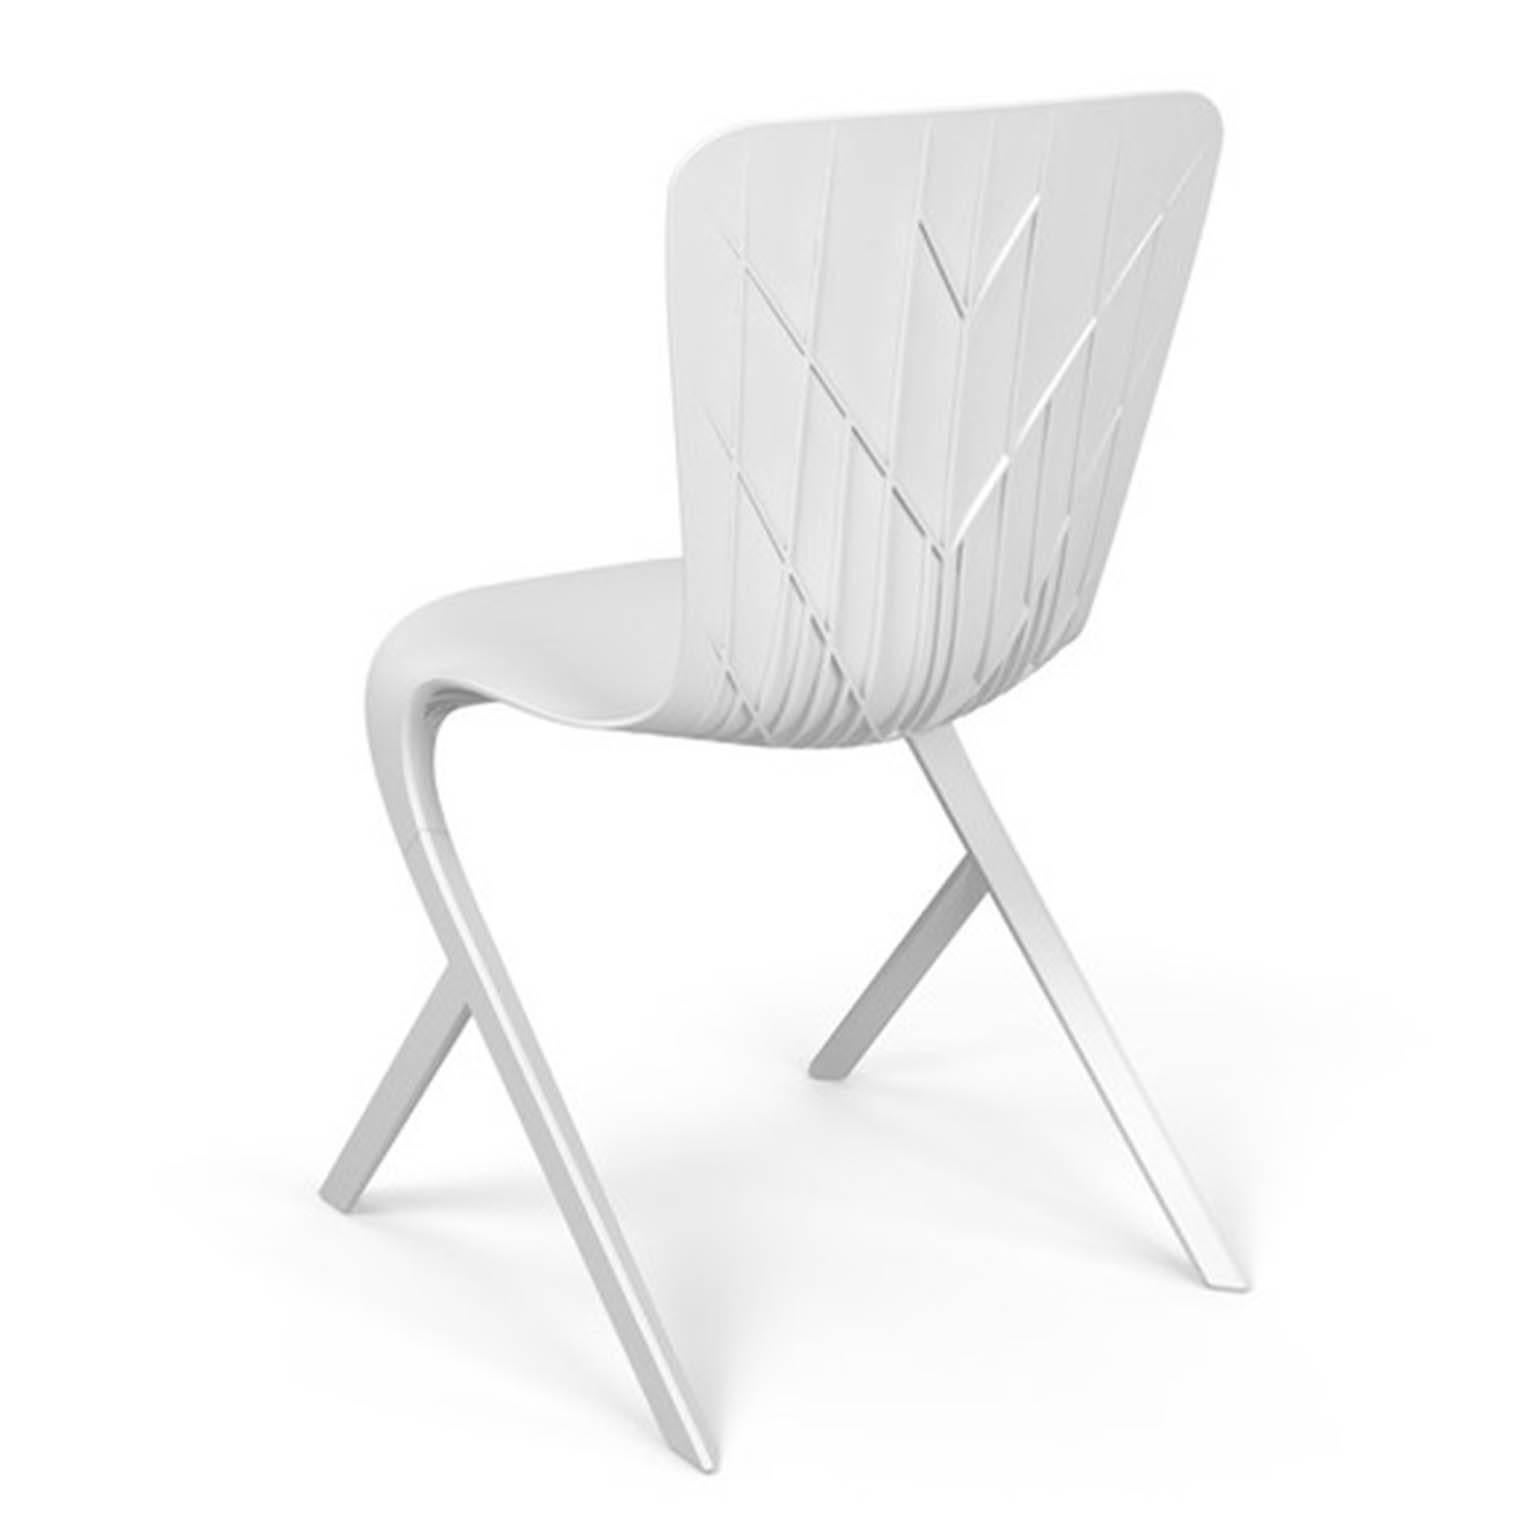 Price is per chair. Individual purchases accepted. 

One has sold, five are available. 

Set of five, white Washington Skin Nylon chairs. Very easy to clean. 
These currently retail at DWR for $433. 

David Adjaye 2013.

David Adjaye's cantilevered